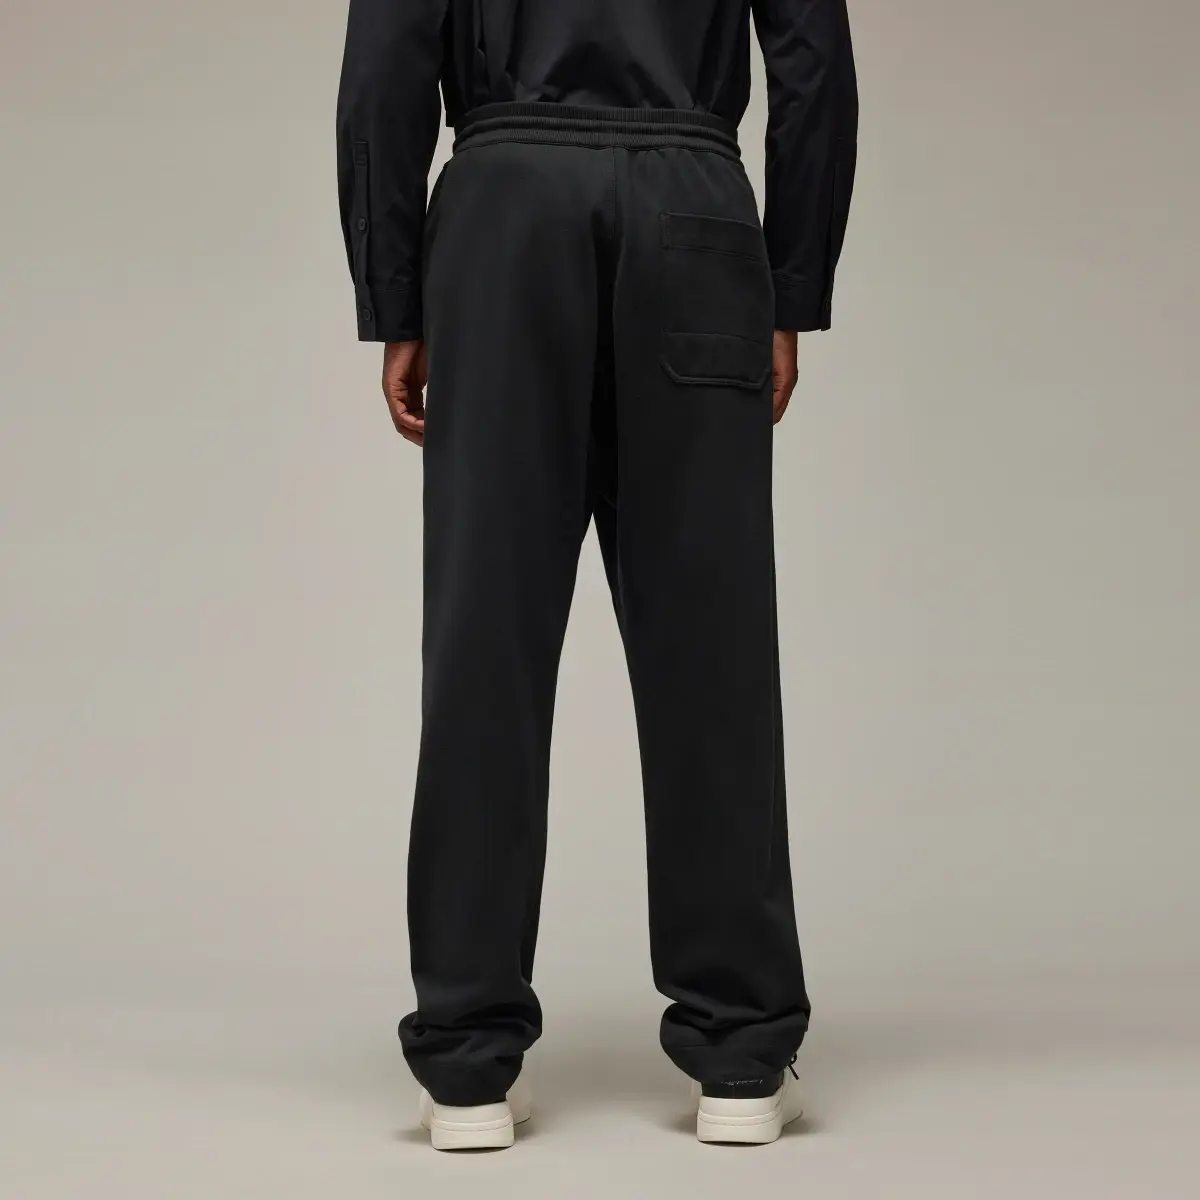 Adidas Y-3 French Terry Straight Joggers. 3